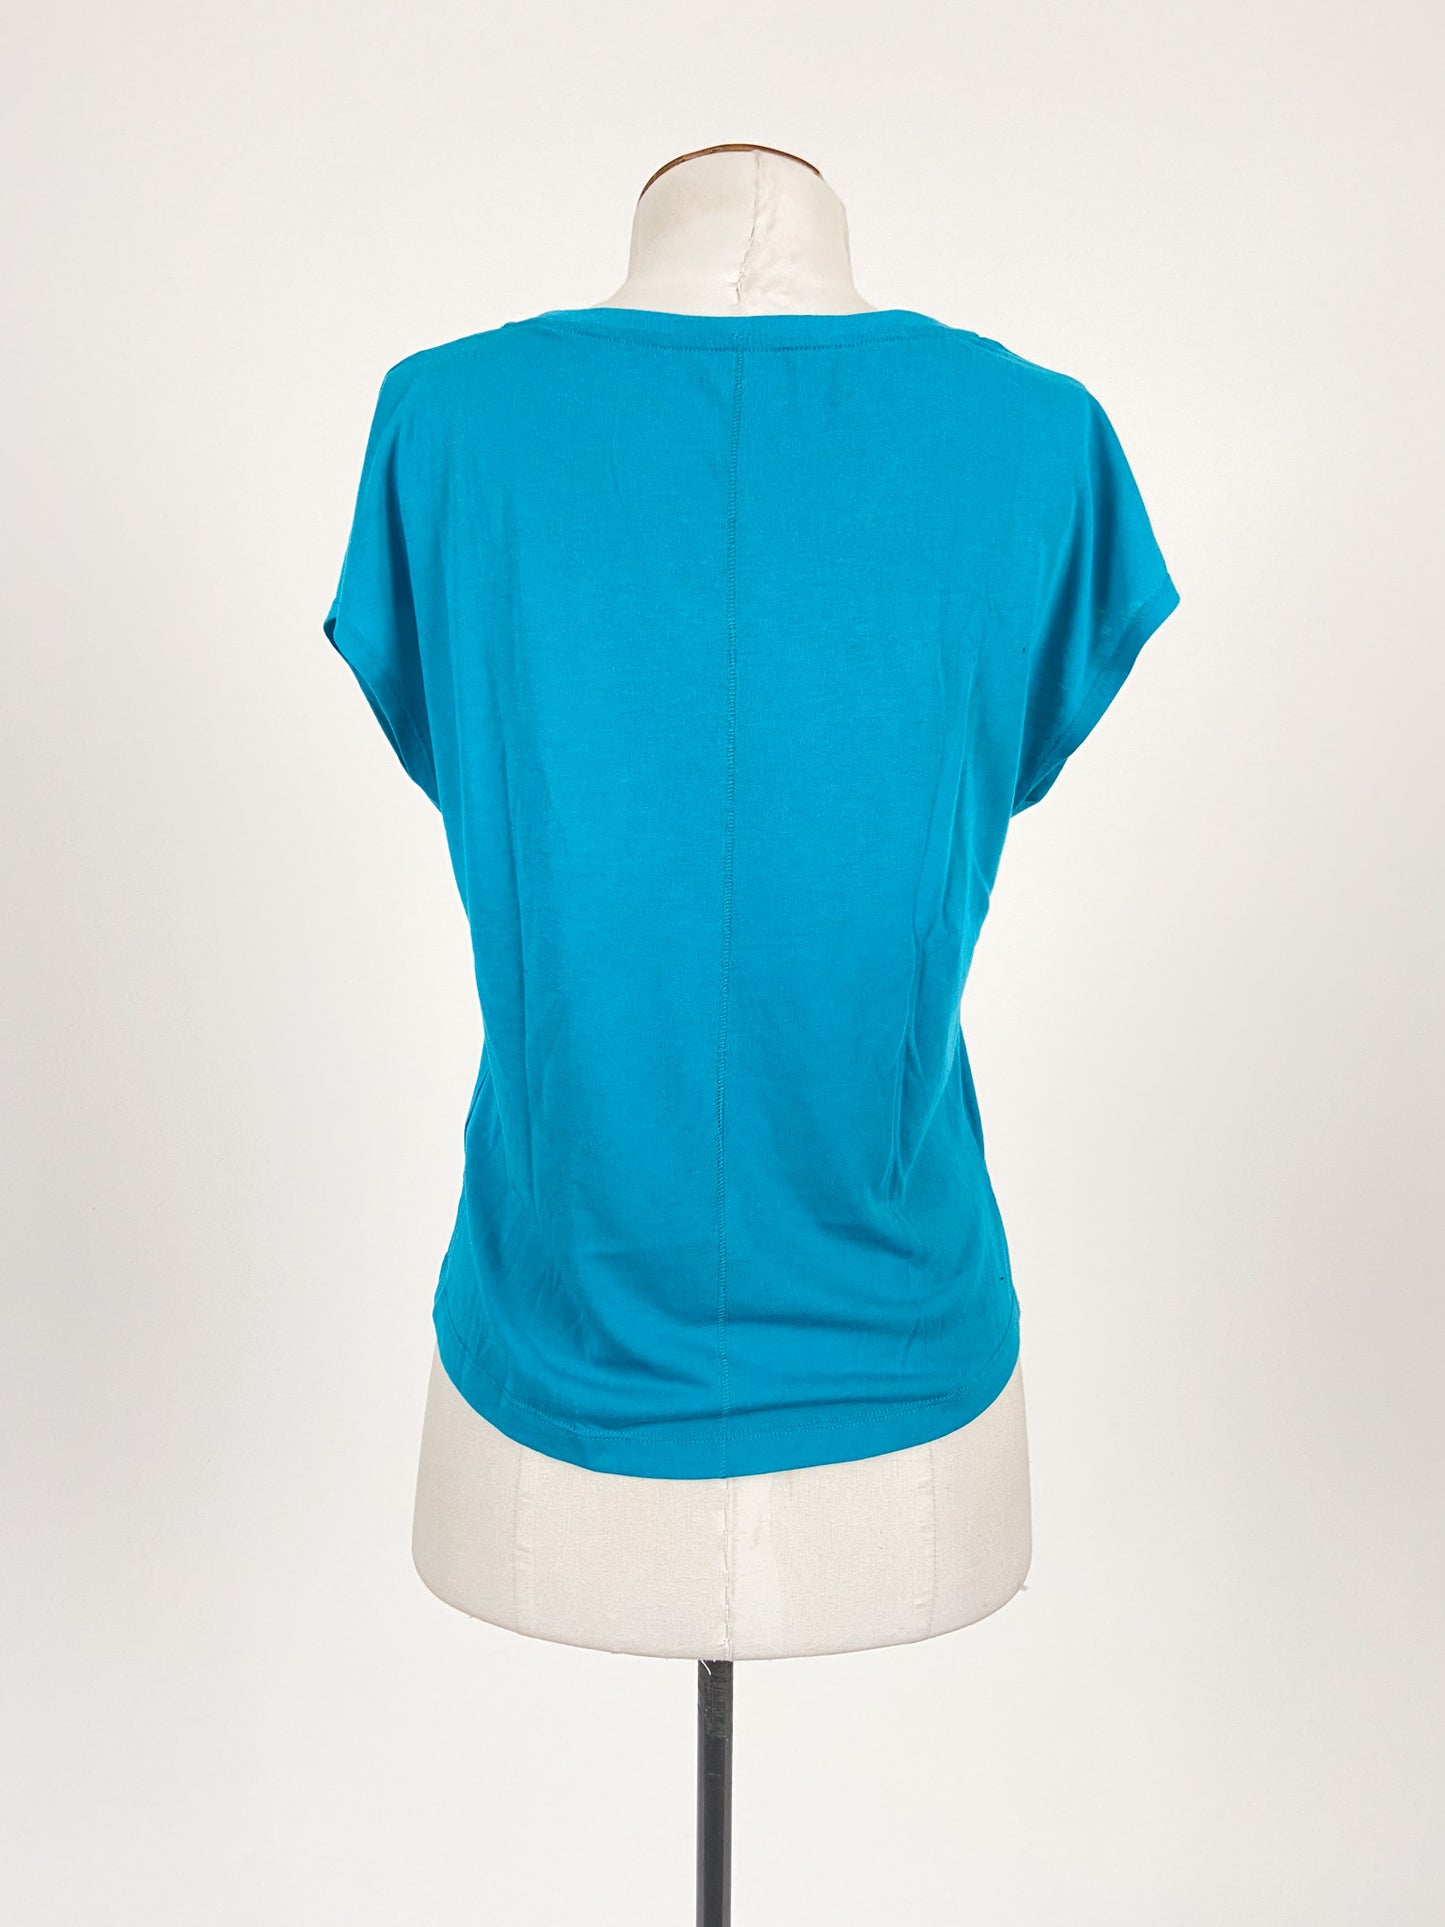 Asics | Blue Casual Top | Size S